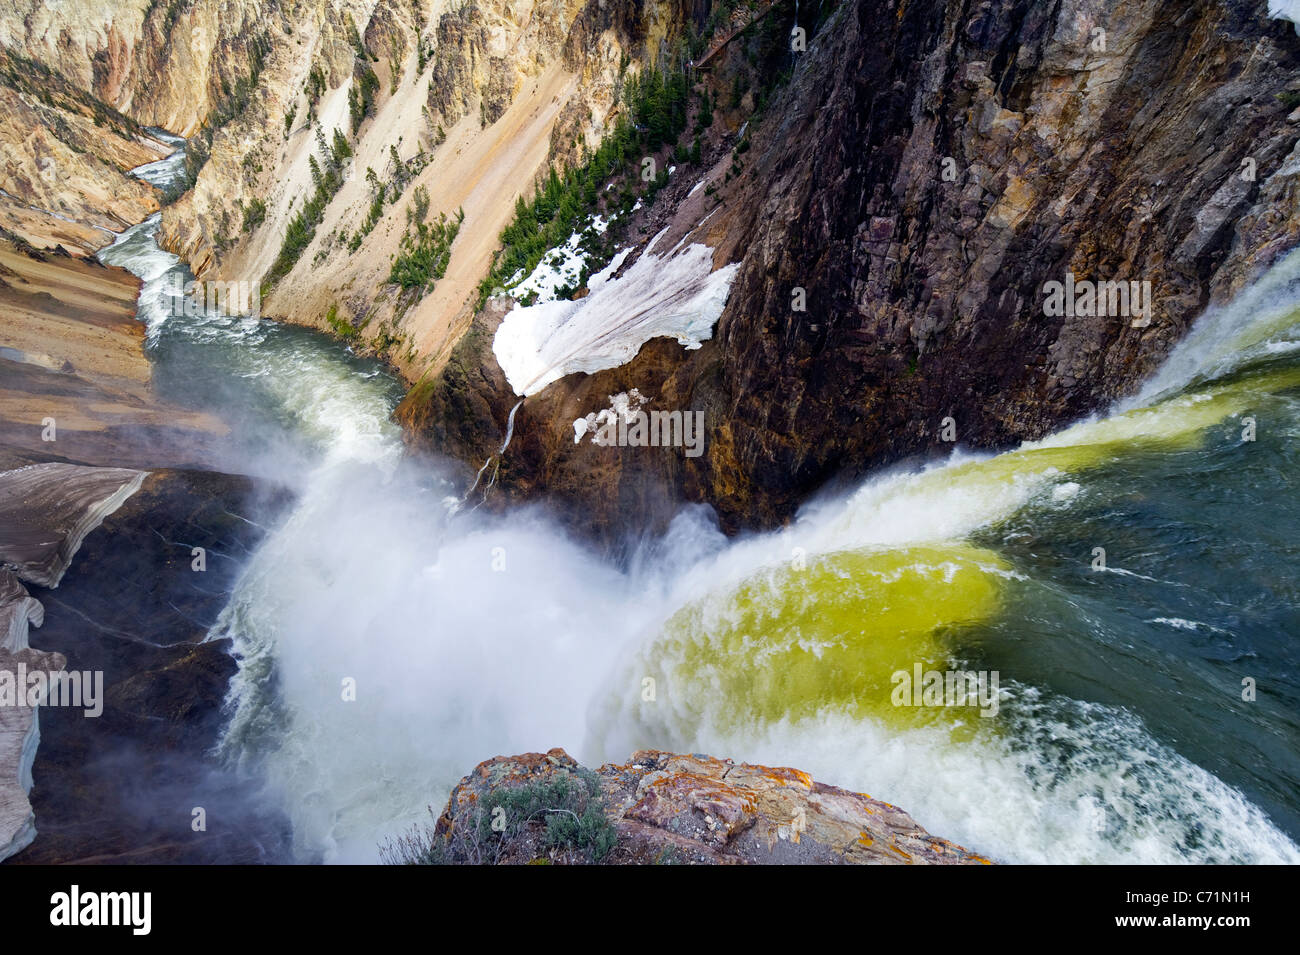 Lower Yellowstone Falls cascades into the valley below in Yellowstone National Park, Wyoming. Stock Photo